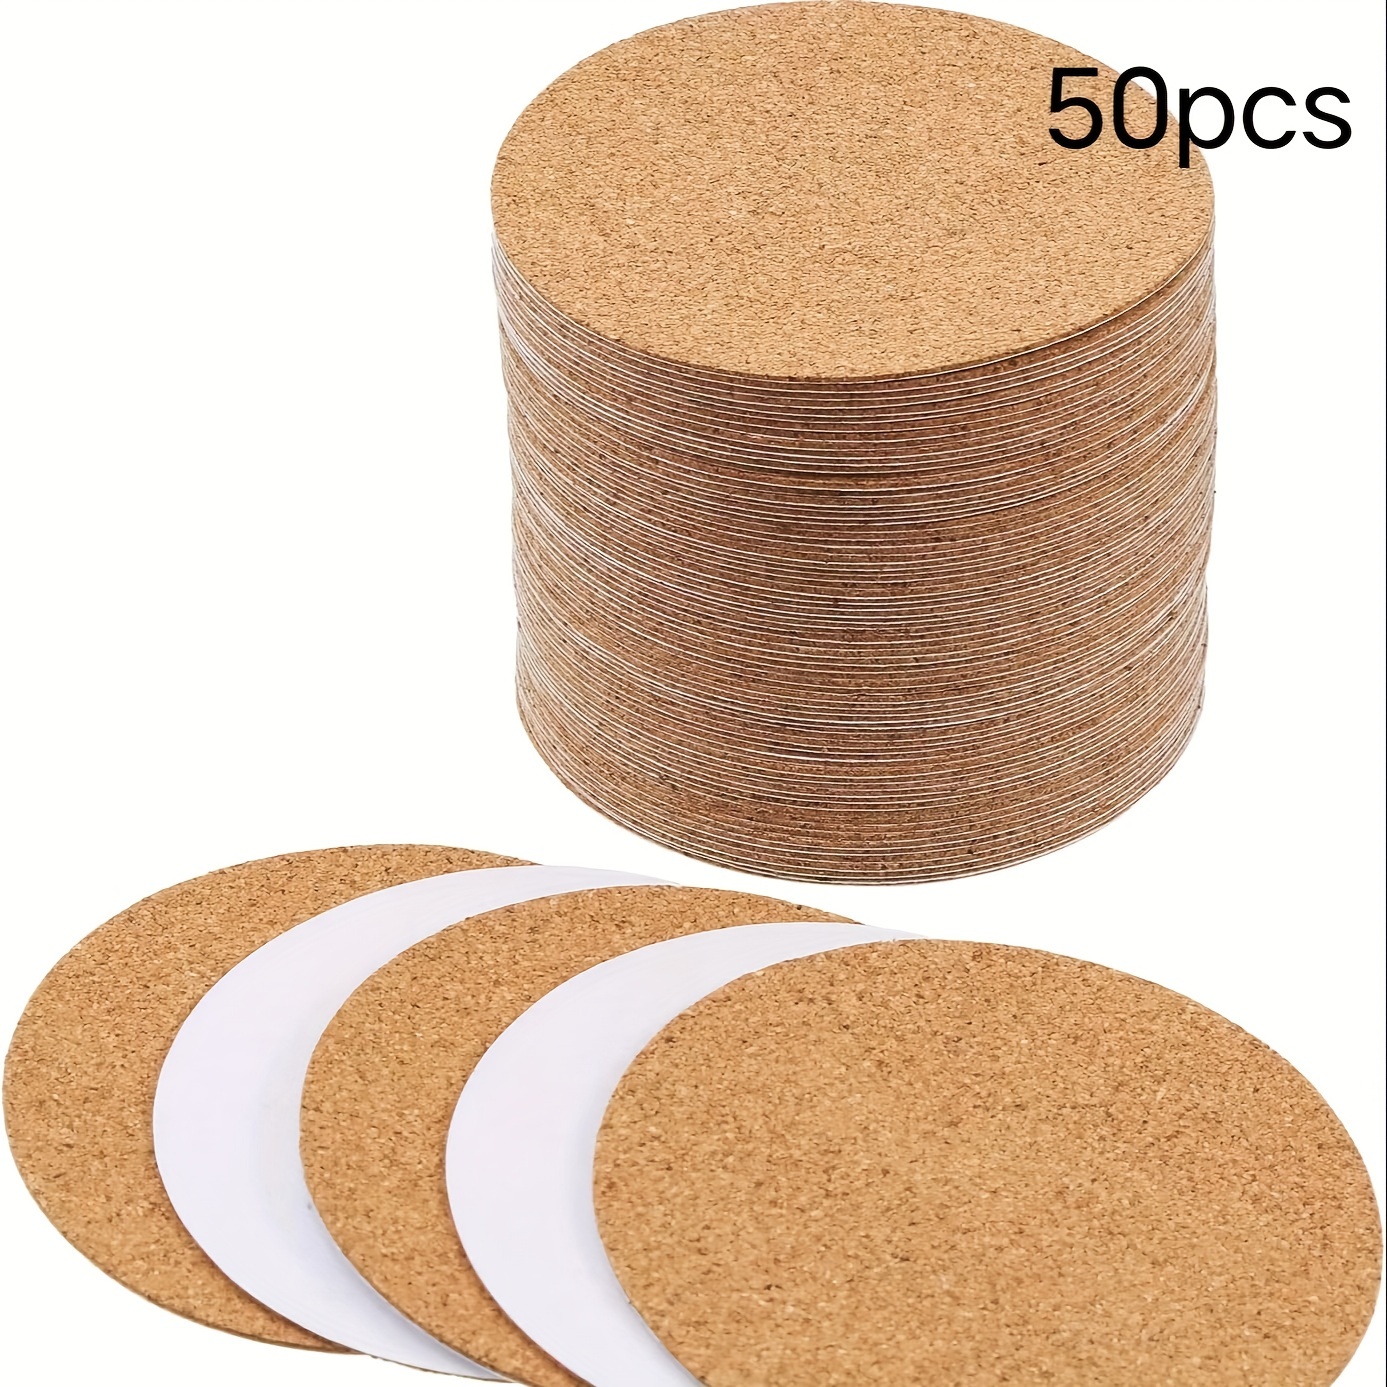 

50pcs Self-adhesive Cork Coasters, Round Cork Cushions, Cork Spacers For Coasters And Diy Craft Supplies